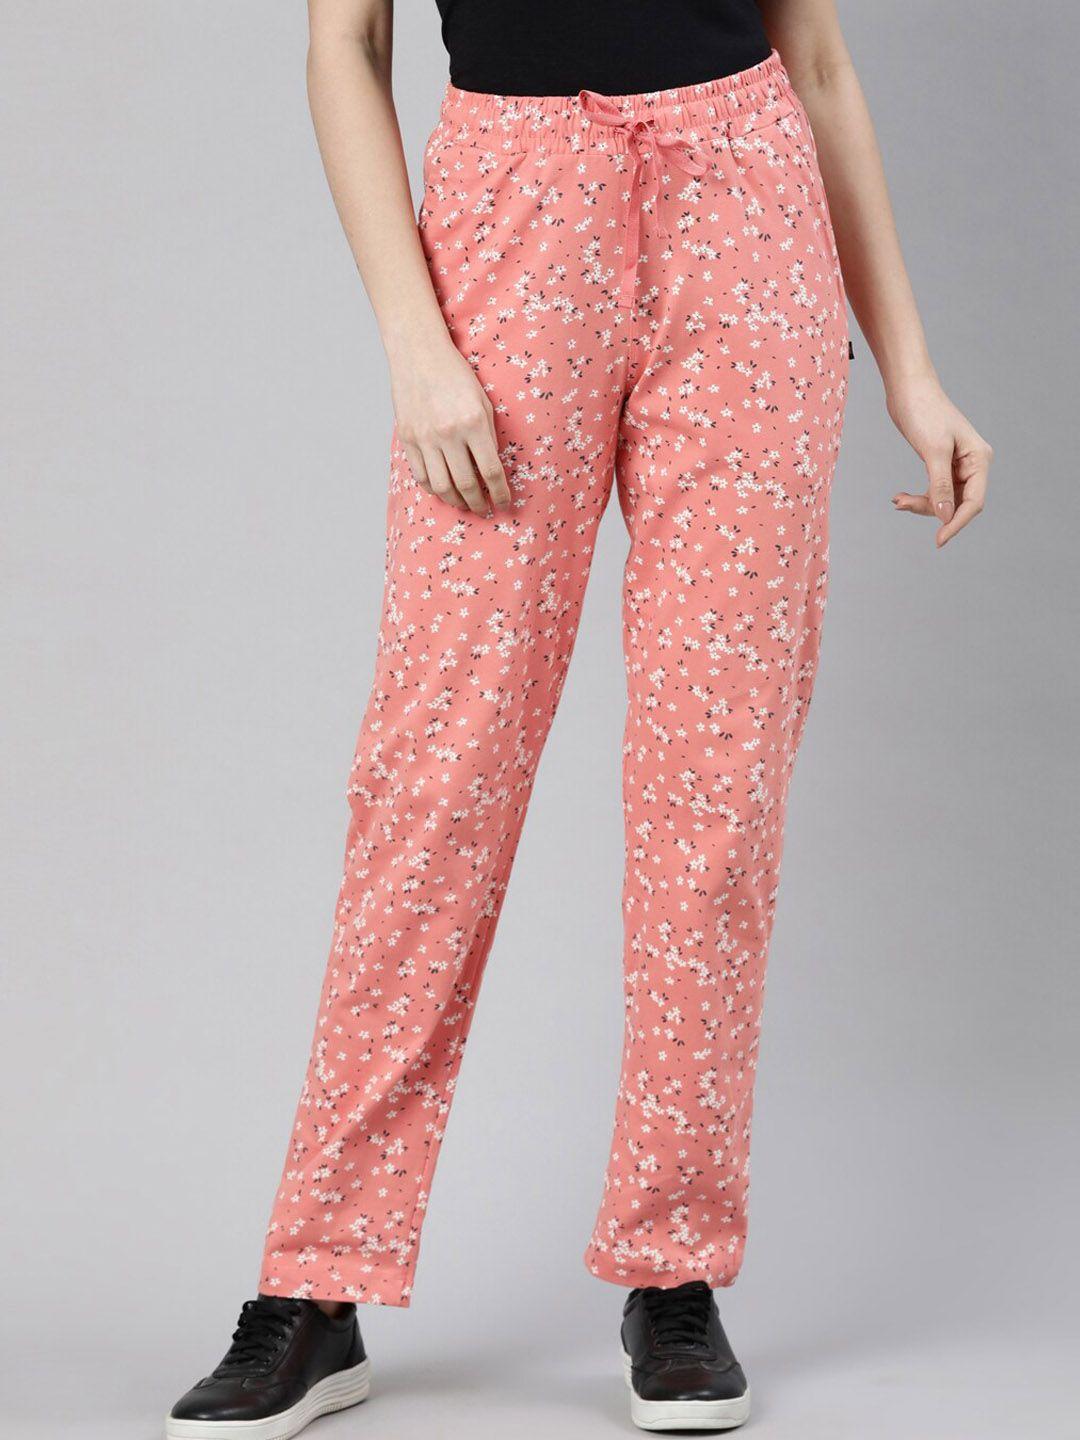 dixcy scott slimz women floral printed pure cotton relaxed-fit track pants